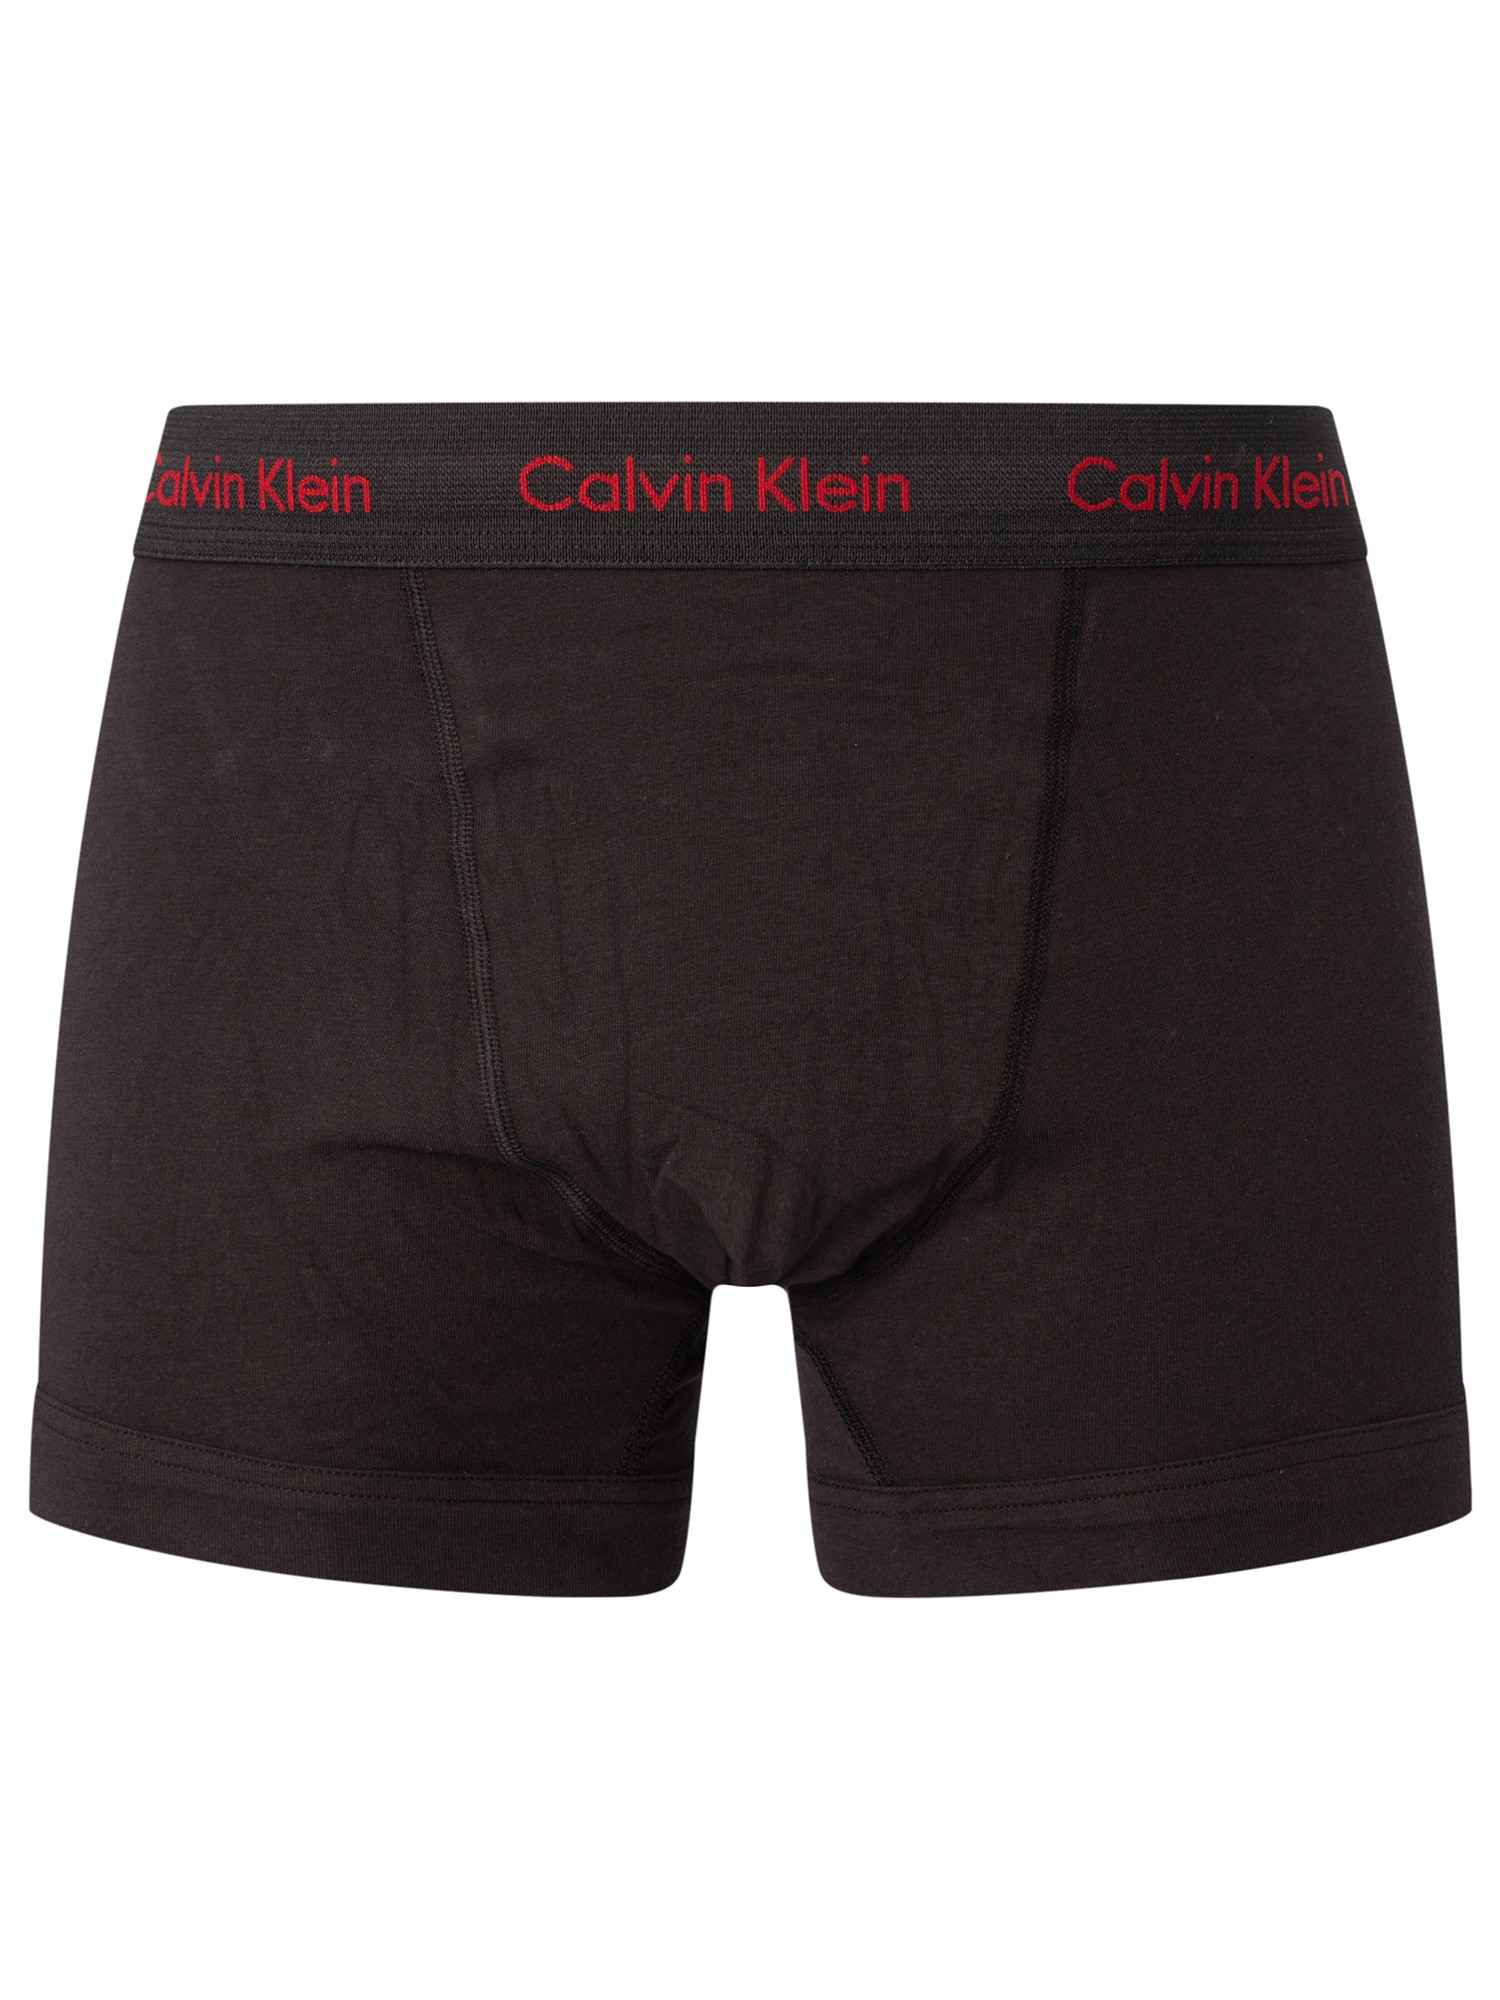 Calvin Klein 3 Pack Limited Edition Trunks - Black (Tuffet/Red Carpet/Exact  Logo) | Standout